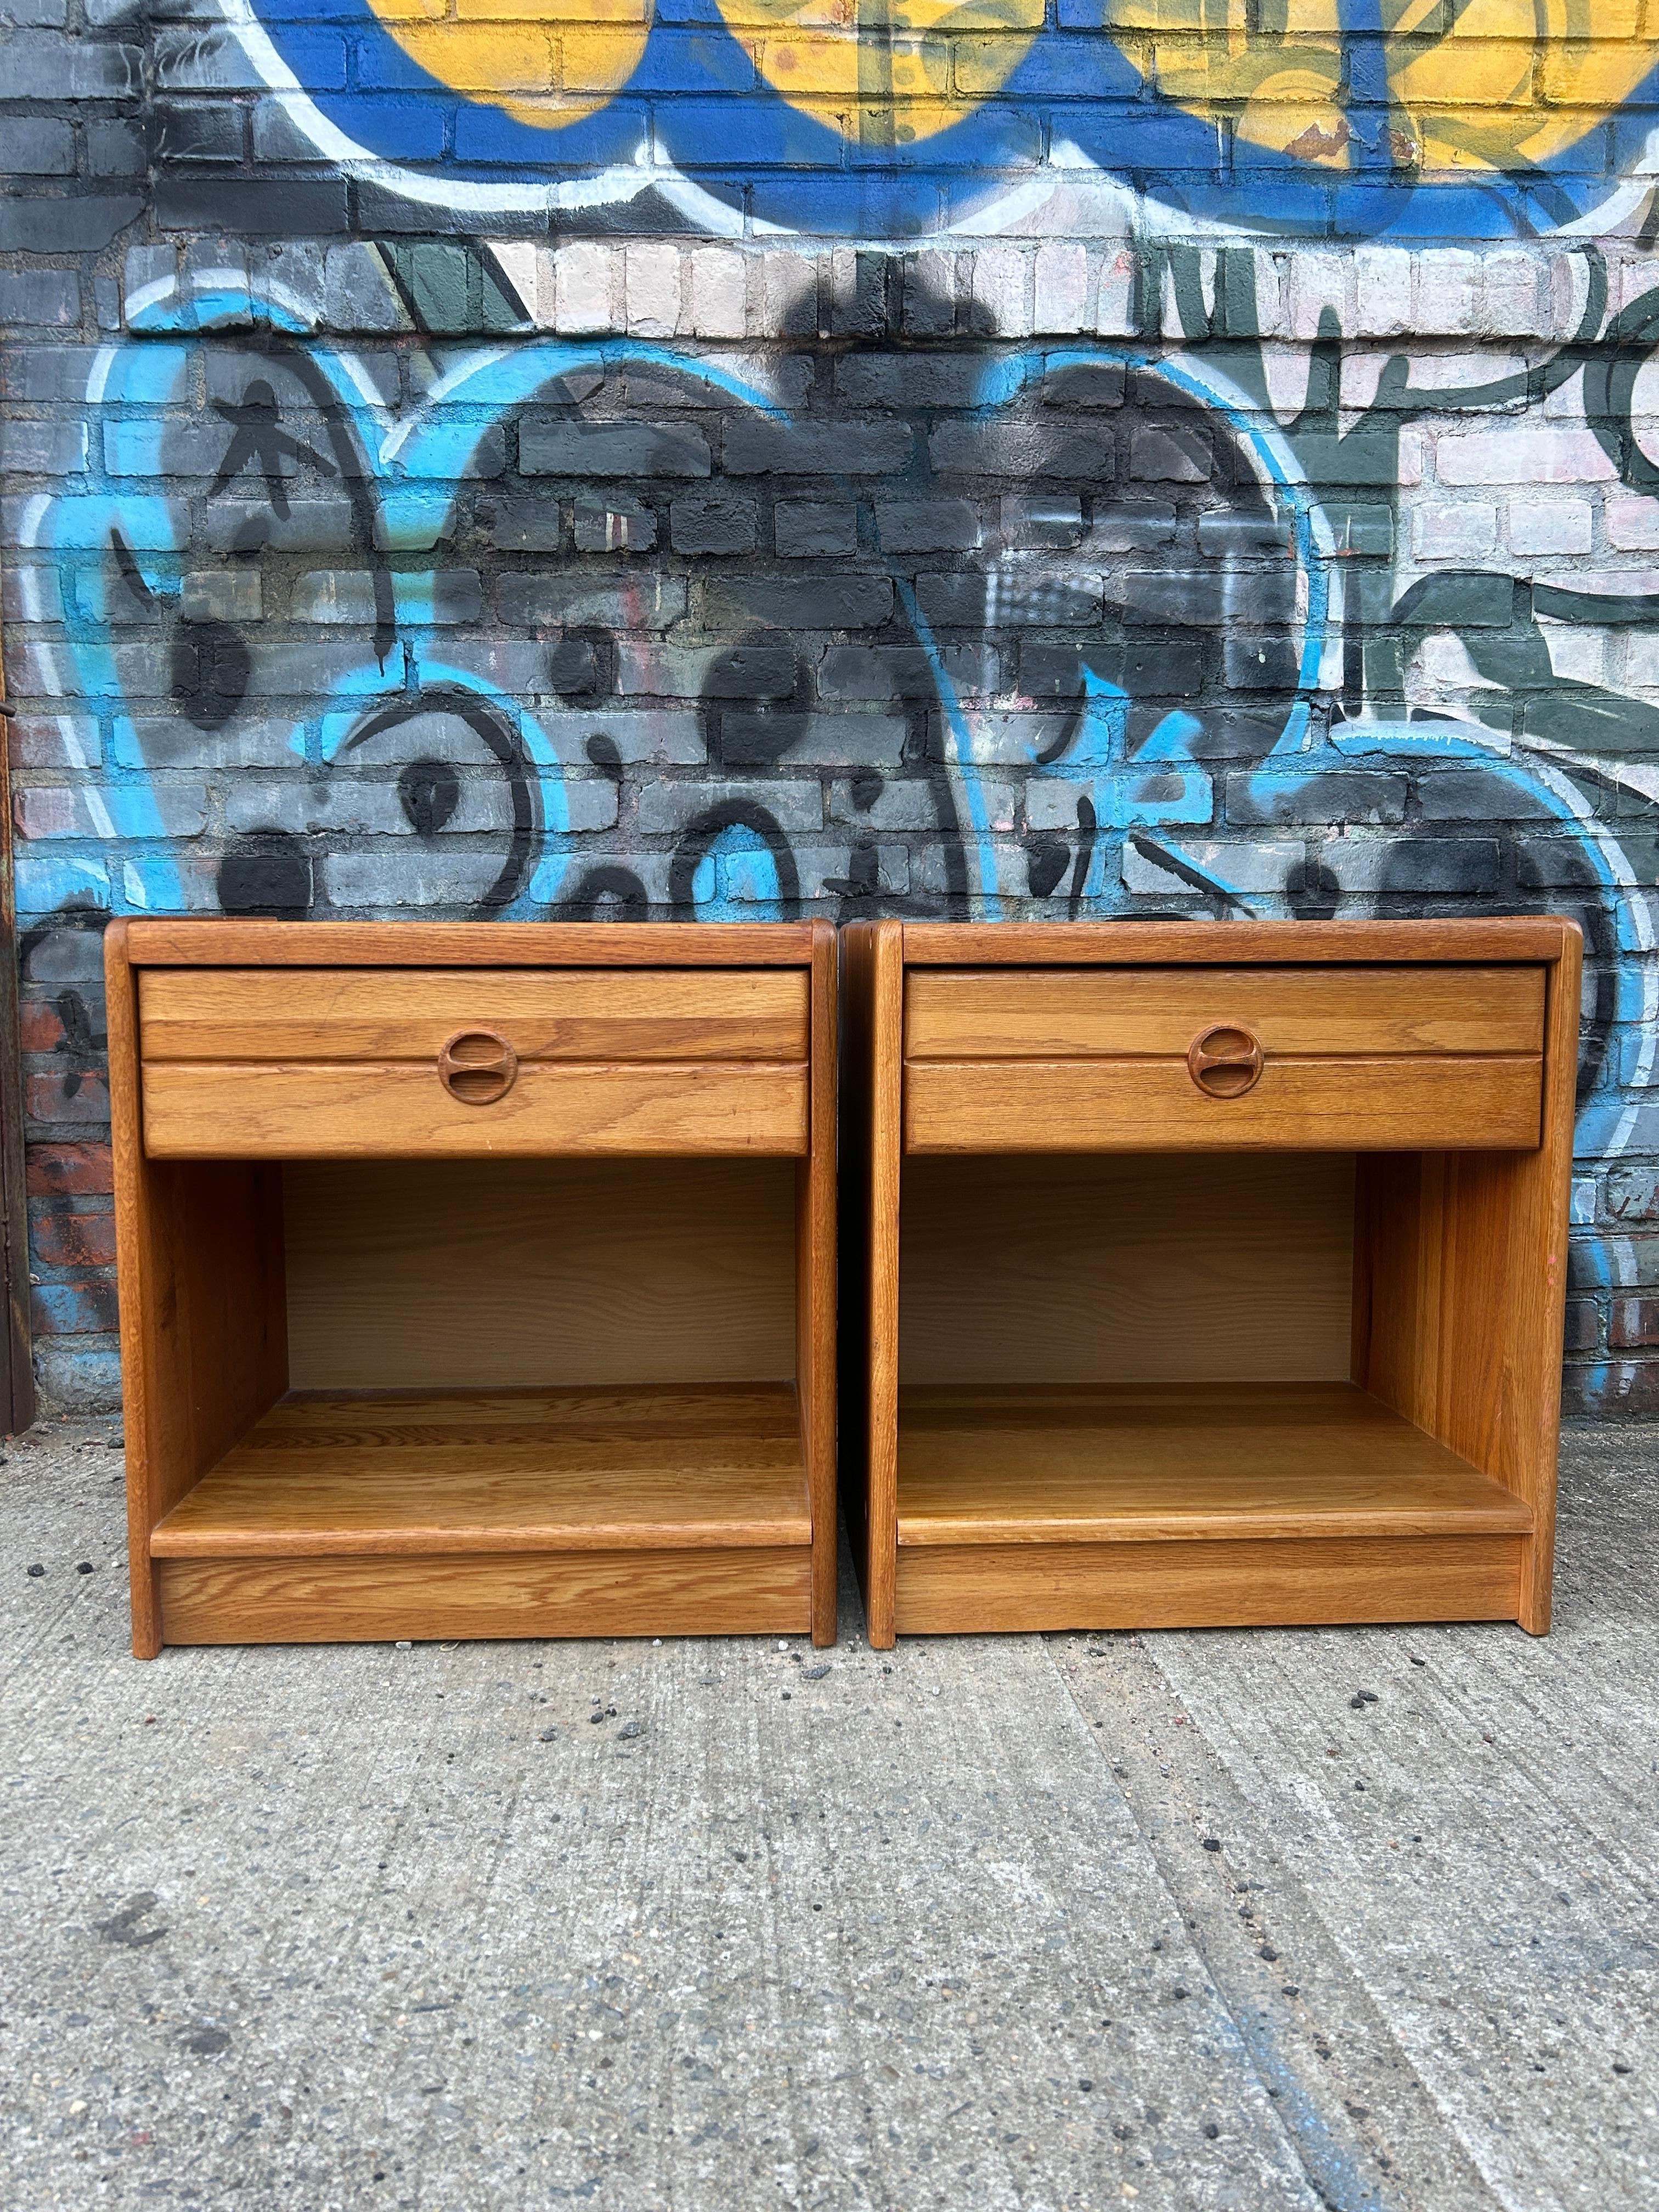 Beautiful pair of mid century Danish modern Solid Oak single-drawer nightstands. Great simple design and great vintage condition - clean inside and out. Drawers slide smooth and with open space below drawer. Great light oak wood grain with solid oak